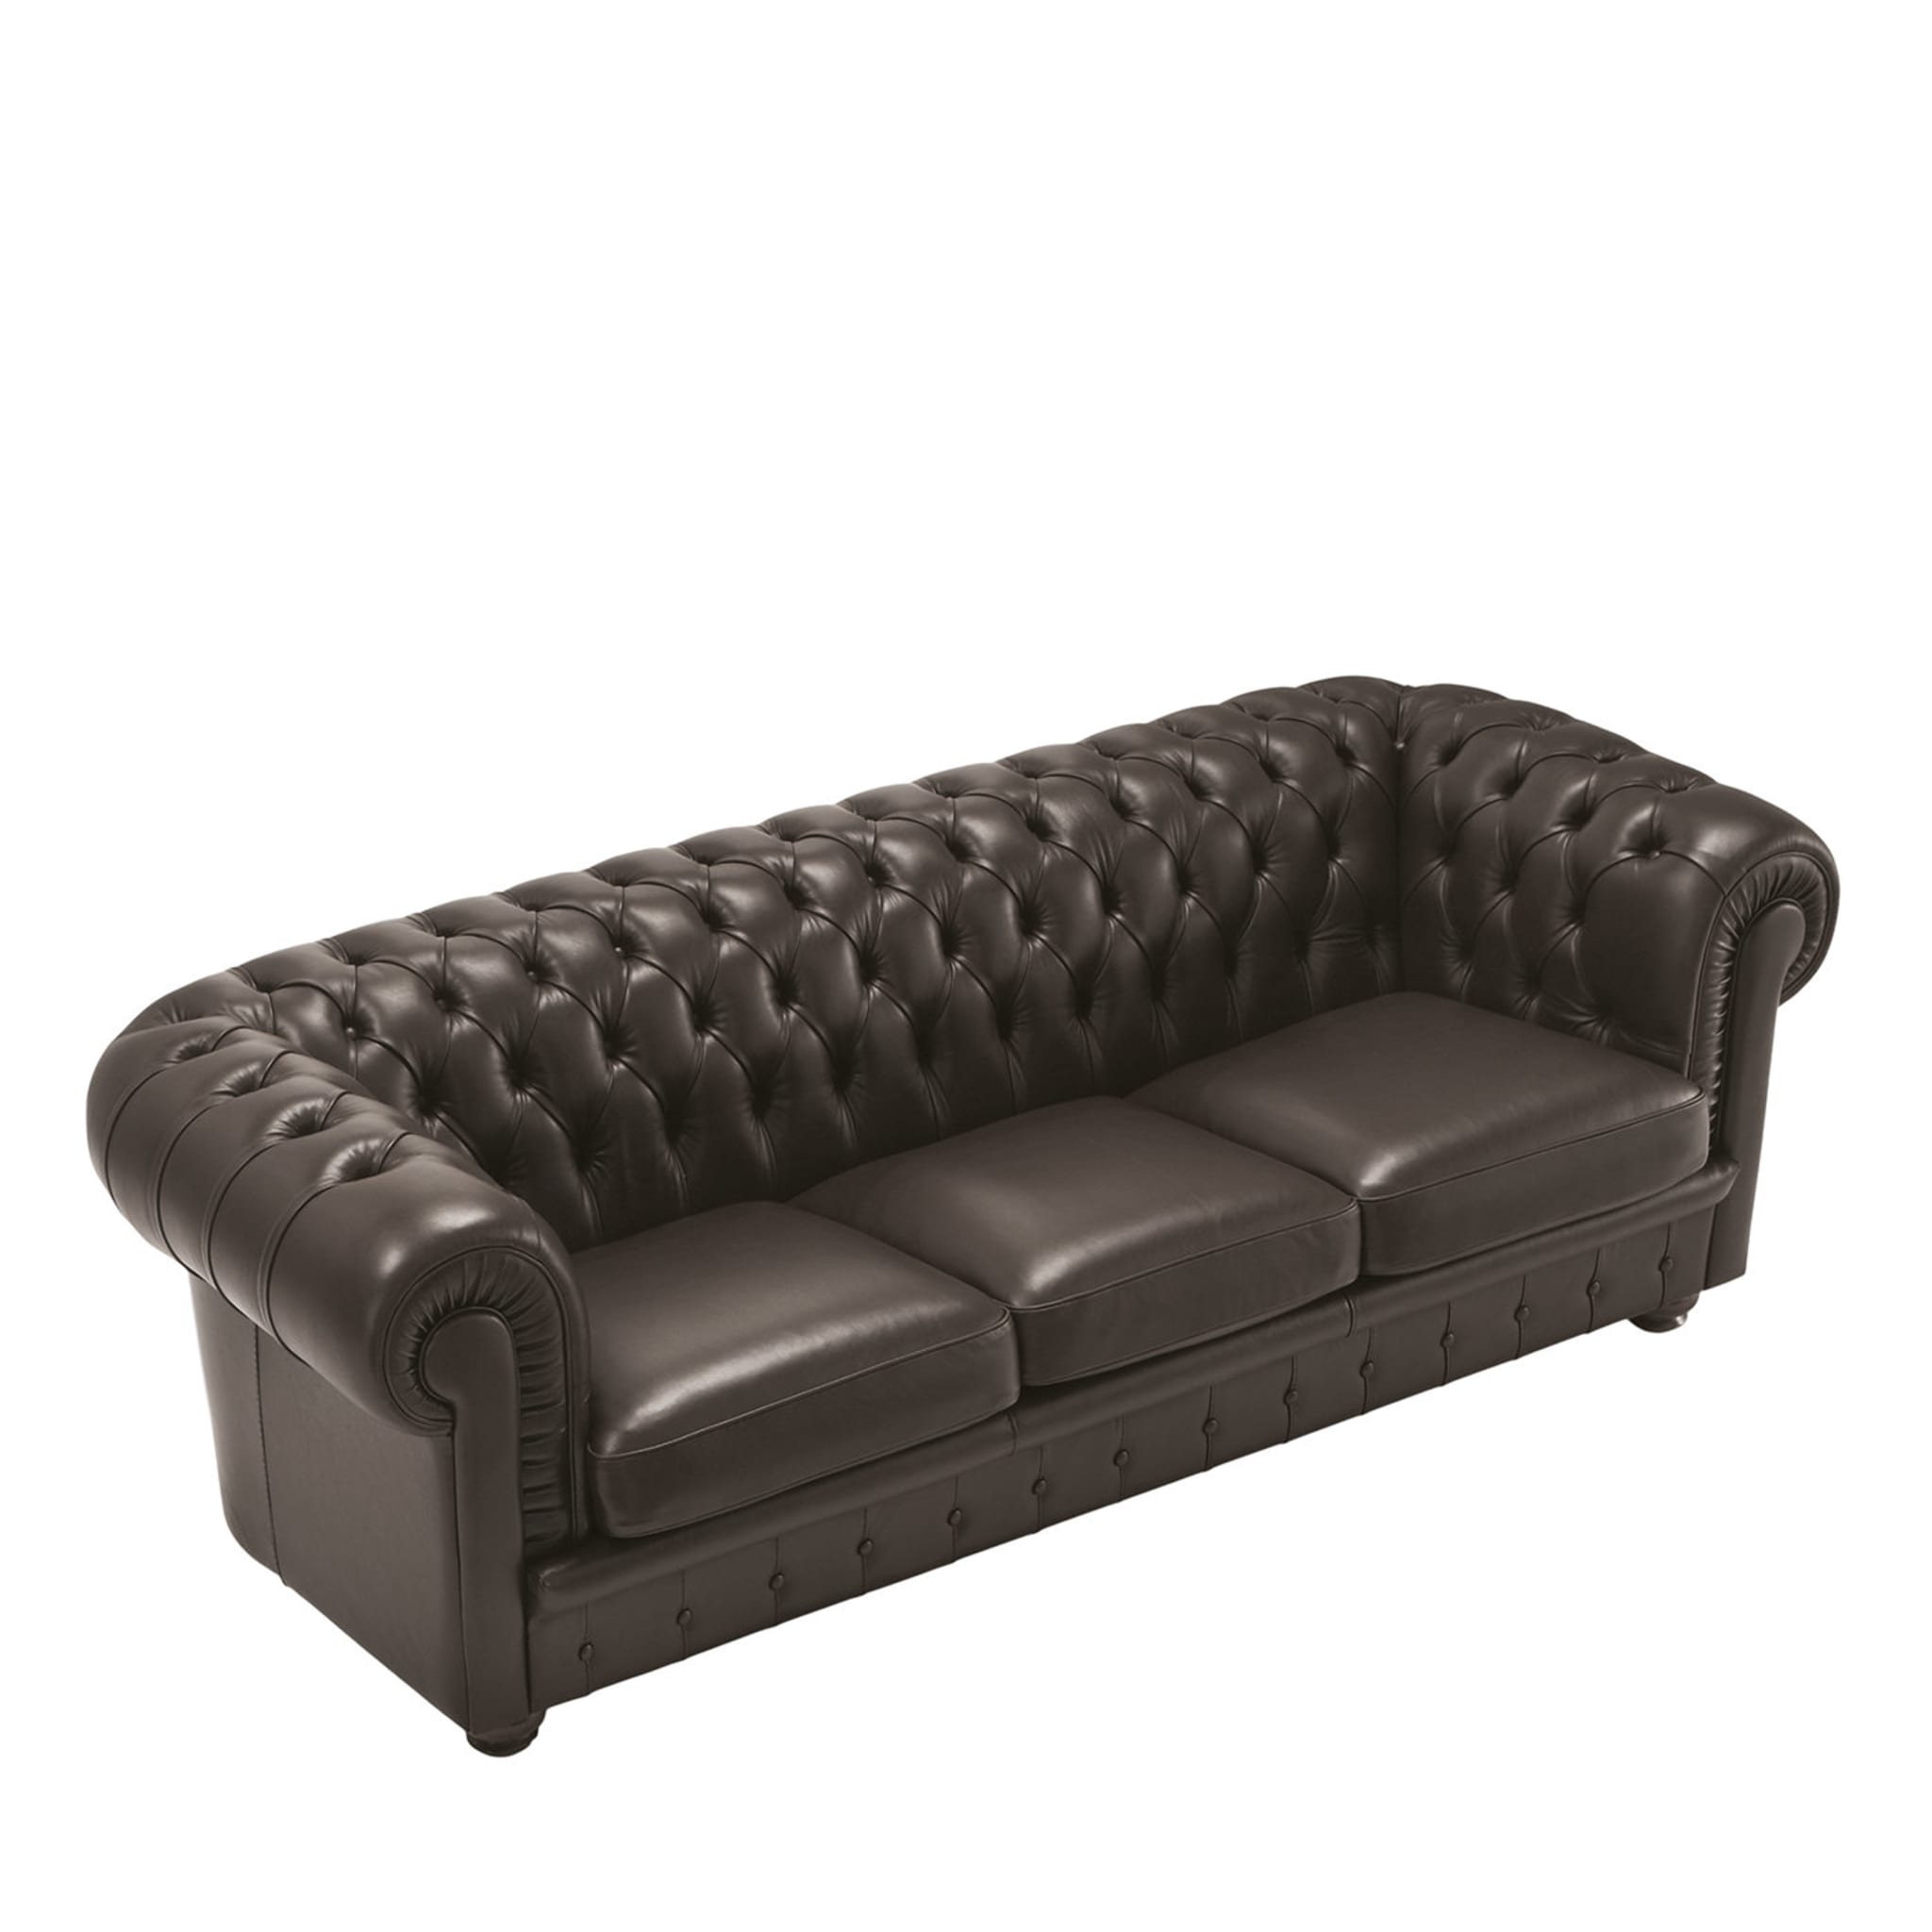 Hermes Brown Leather 3-Seater Sofa - Main view